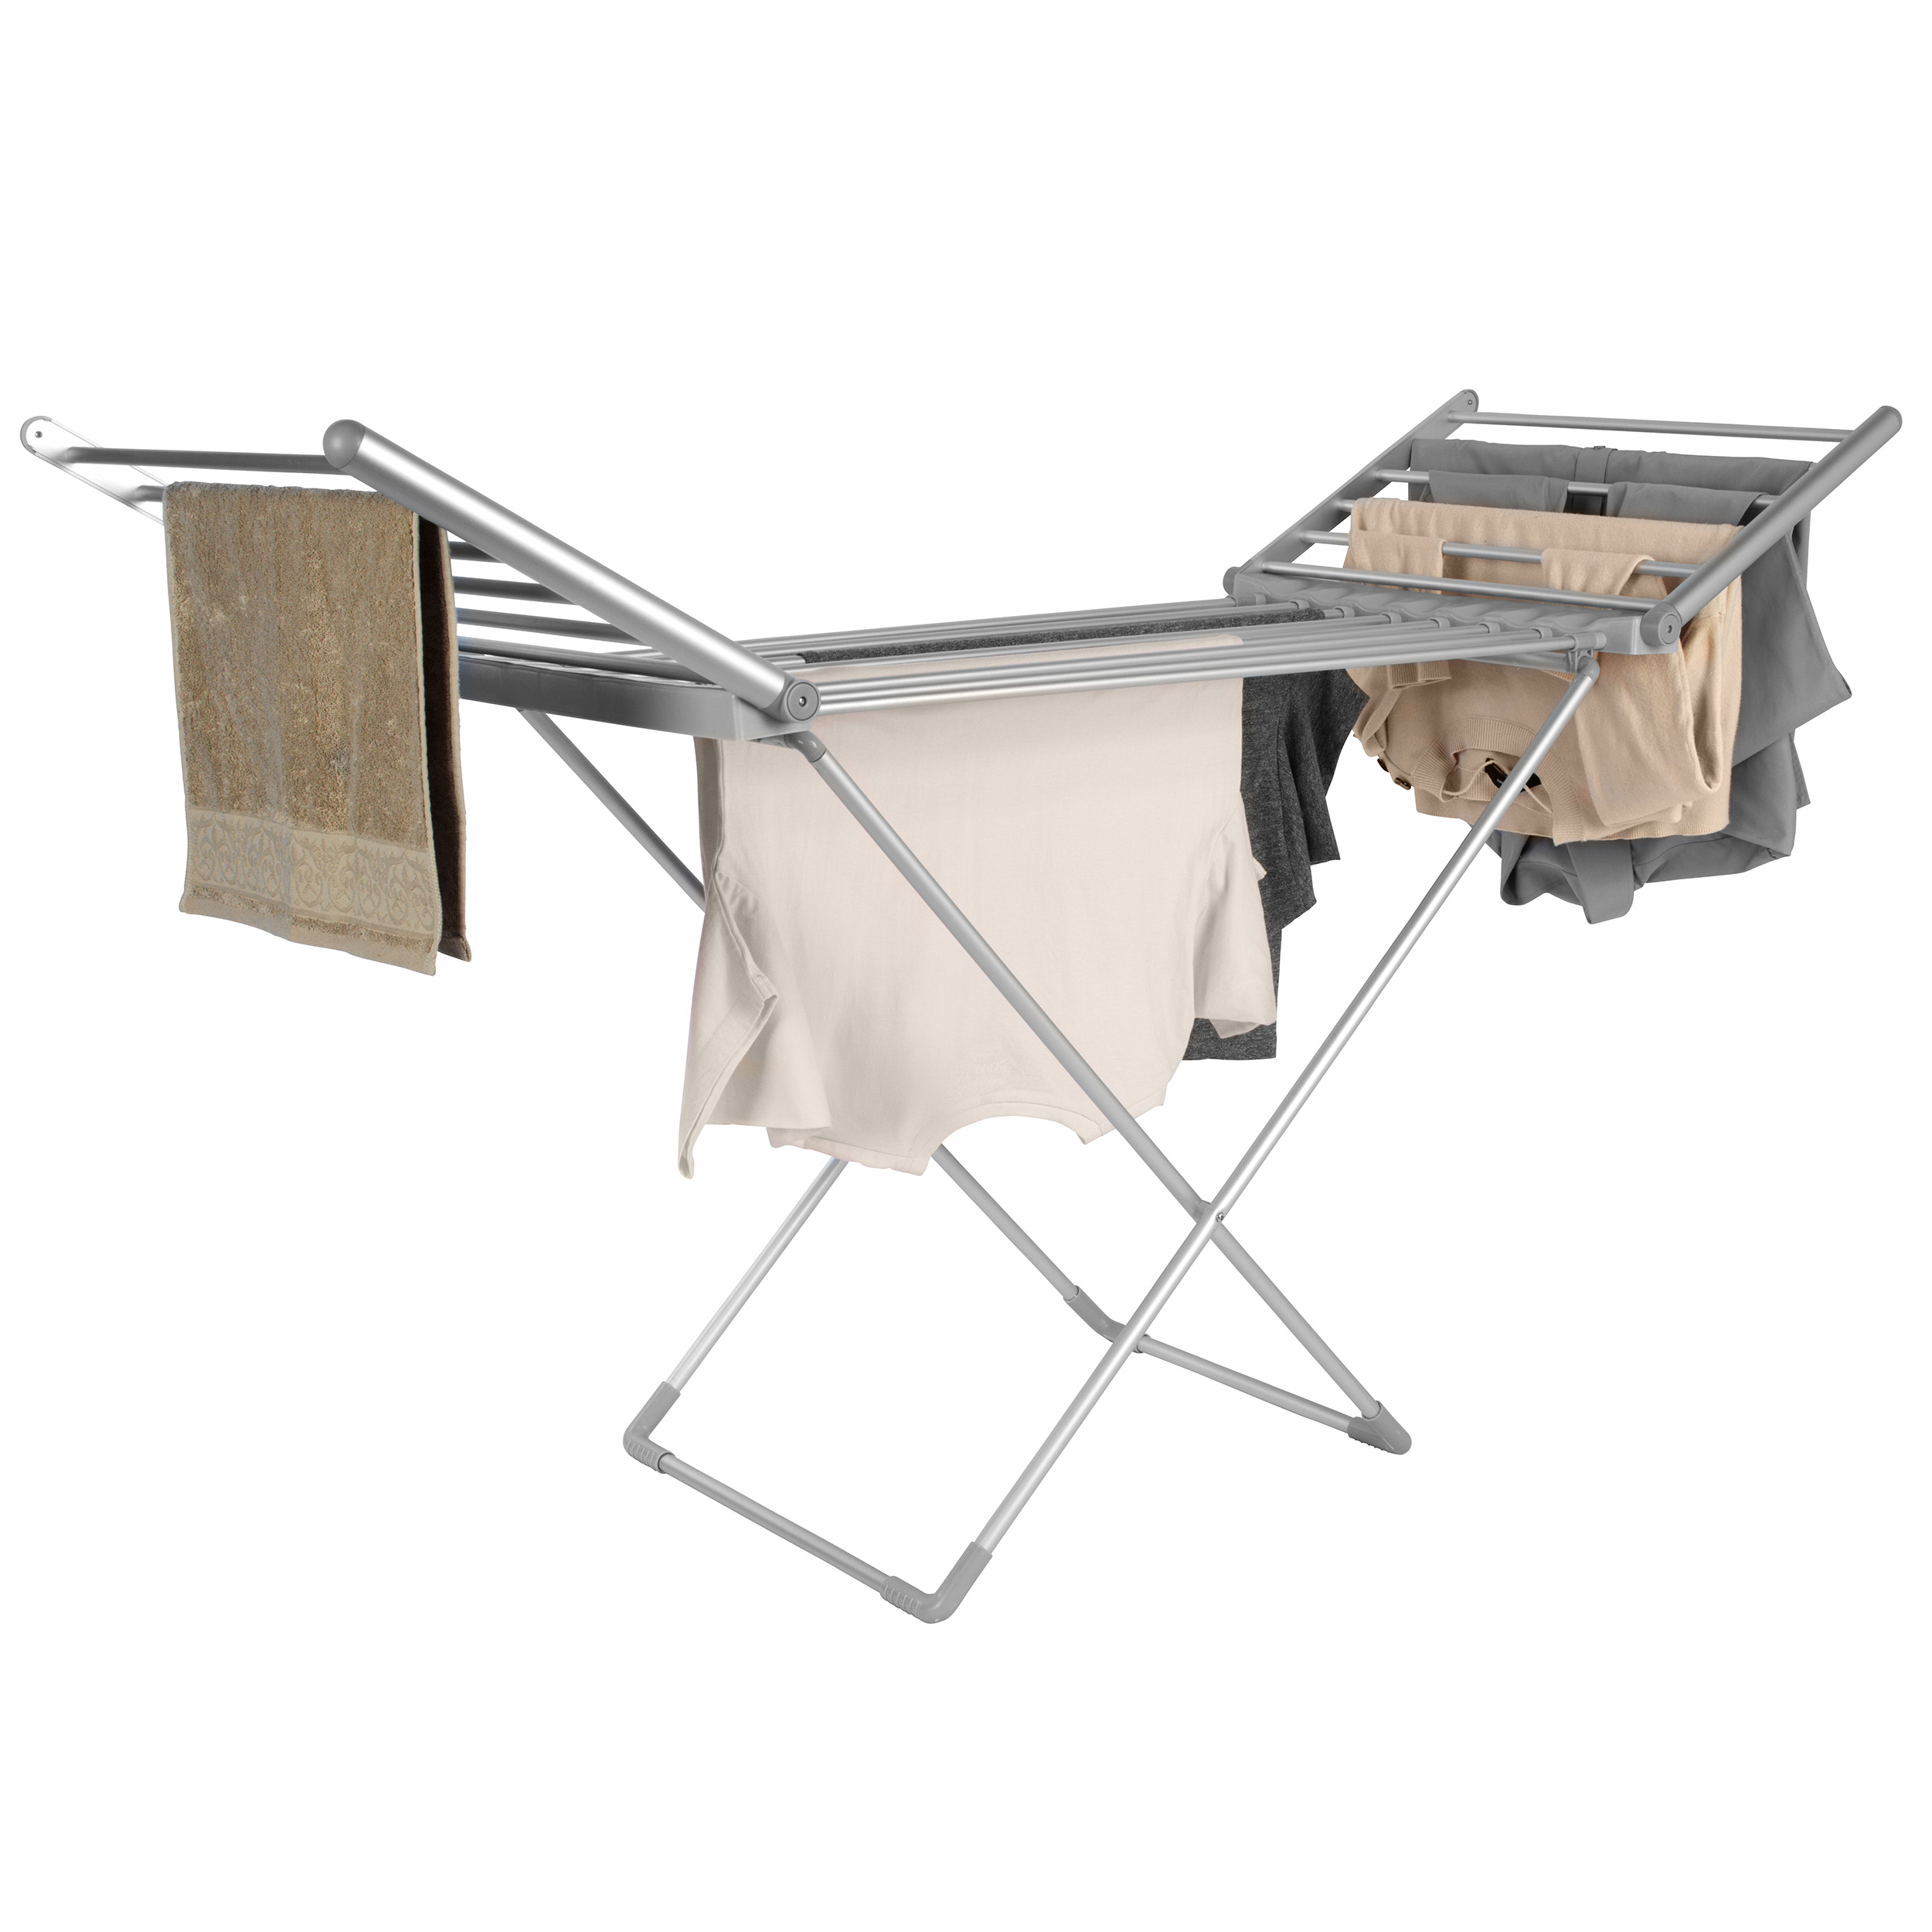 heated clothes airer with towels and garments hanging on it